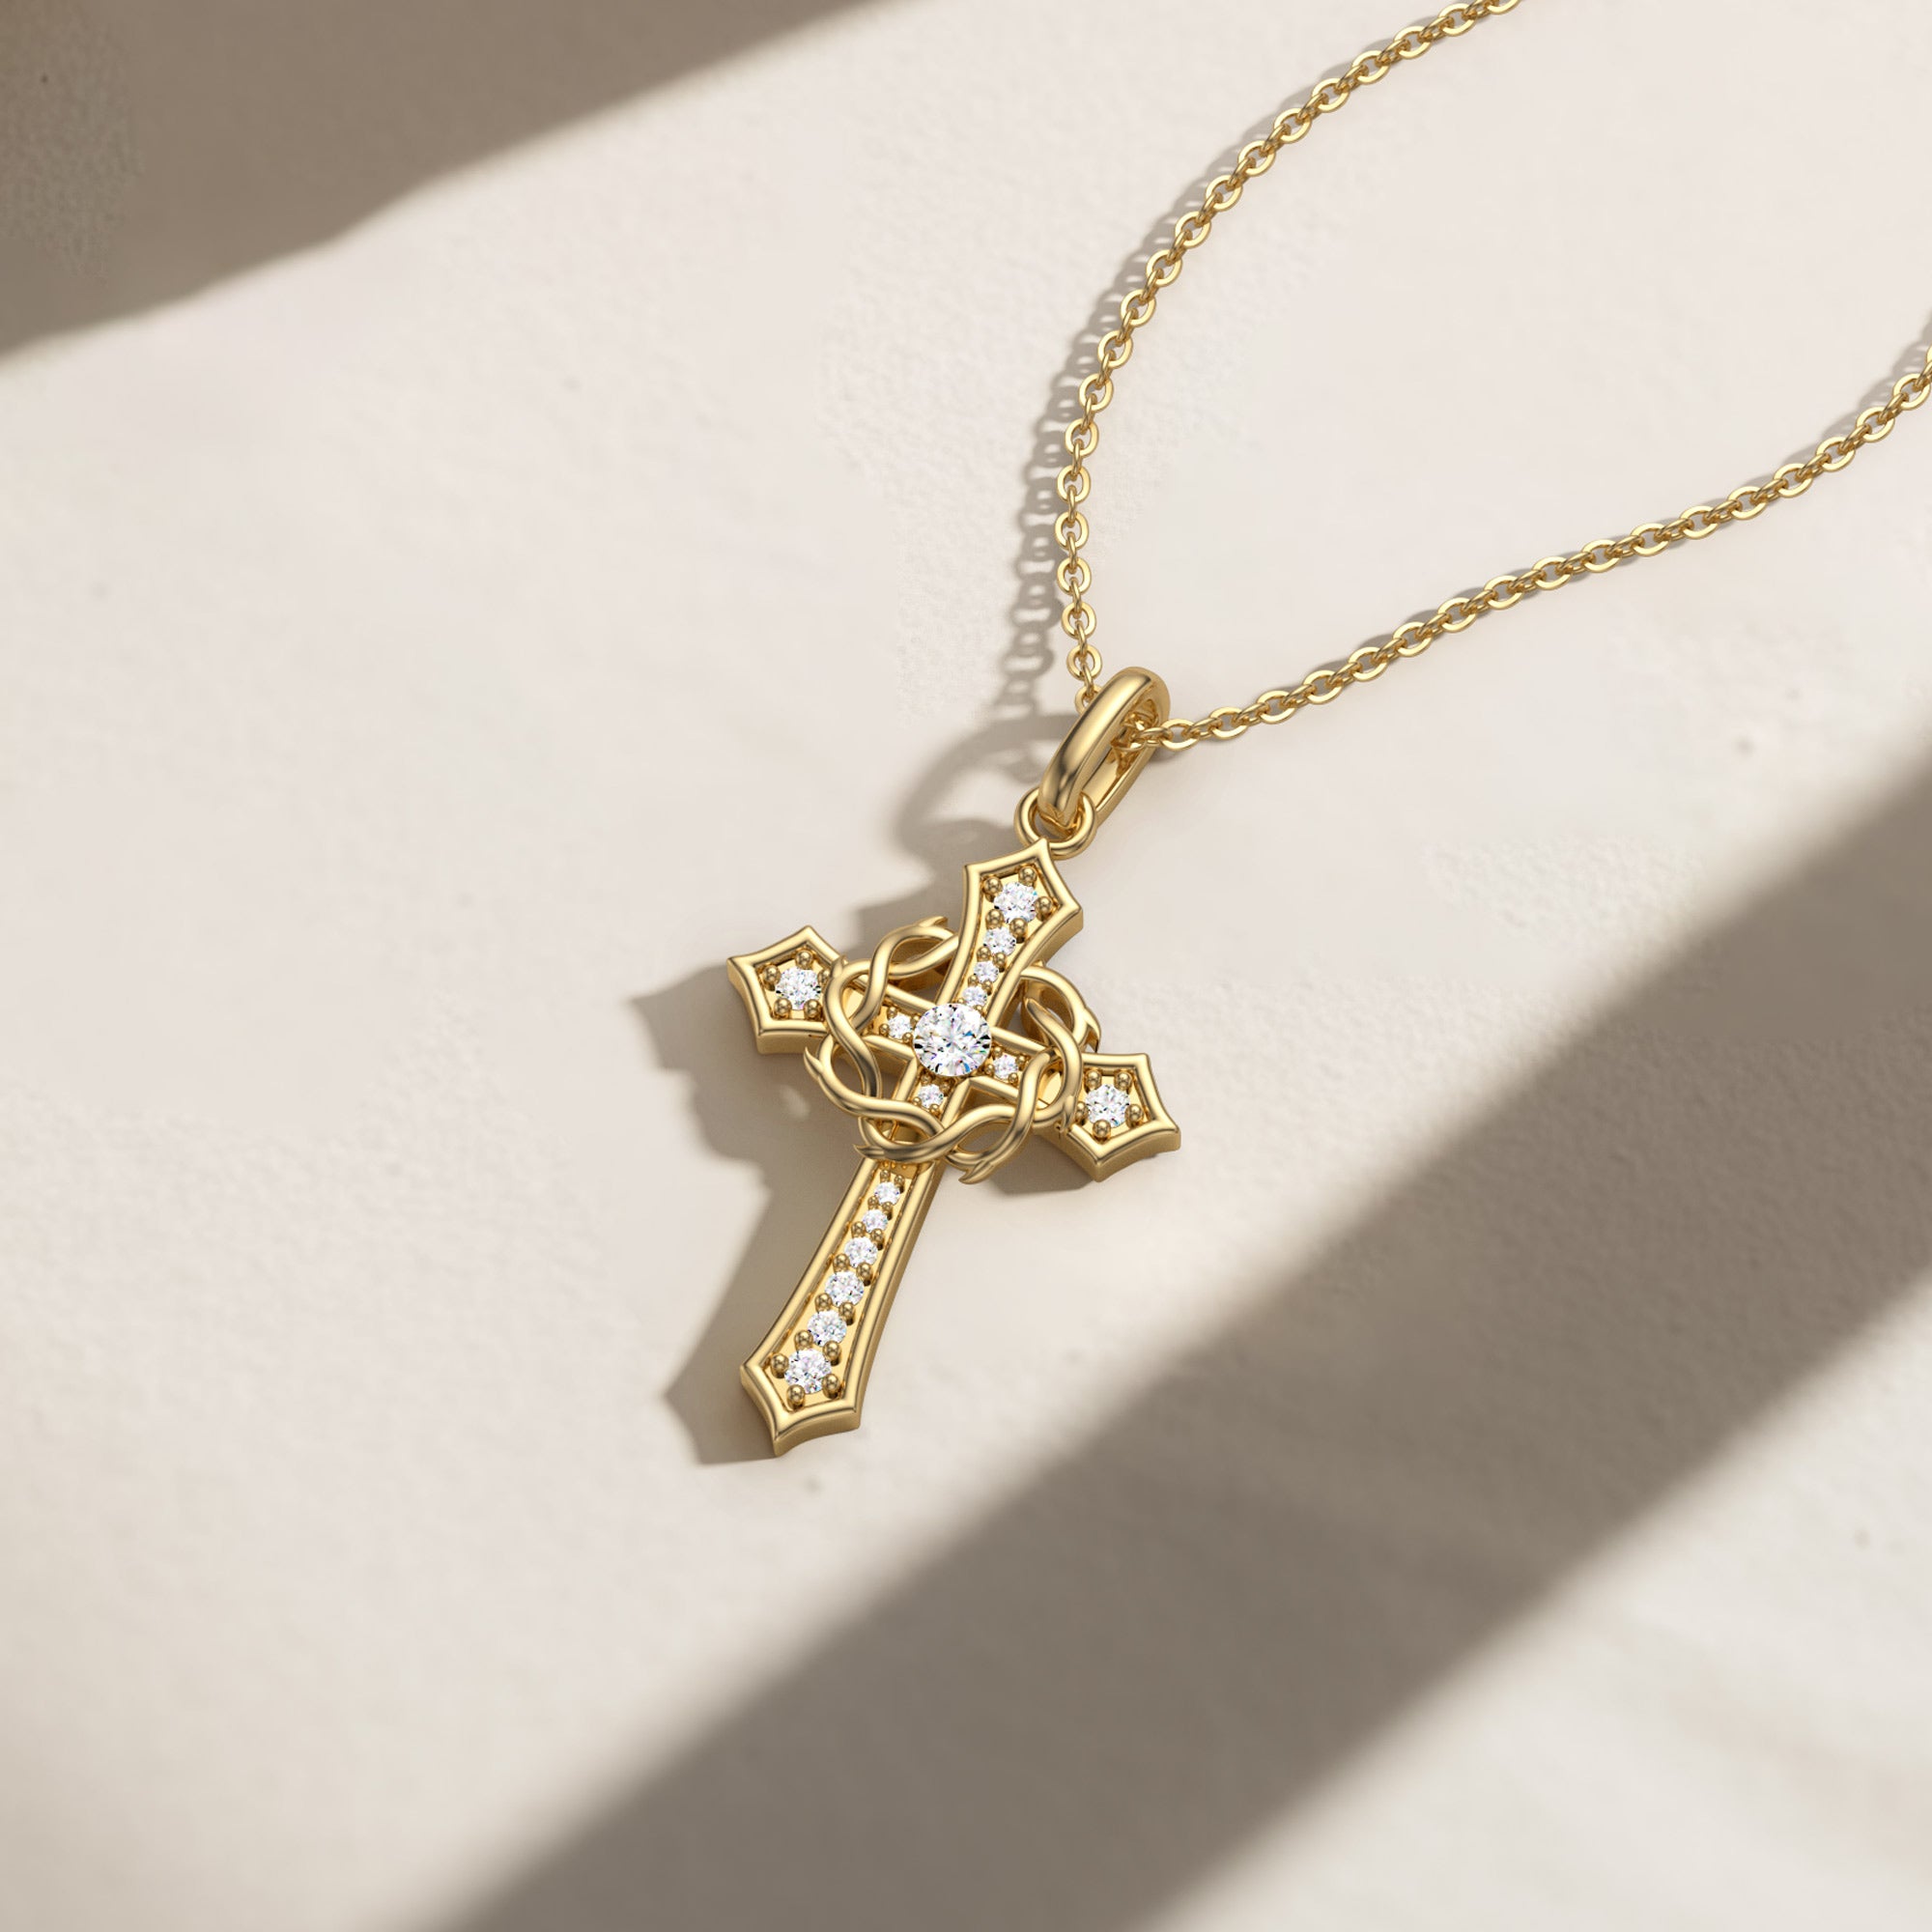 Cross and Crown of Thorns Faith Pendant Necklace - vanimy